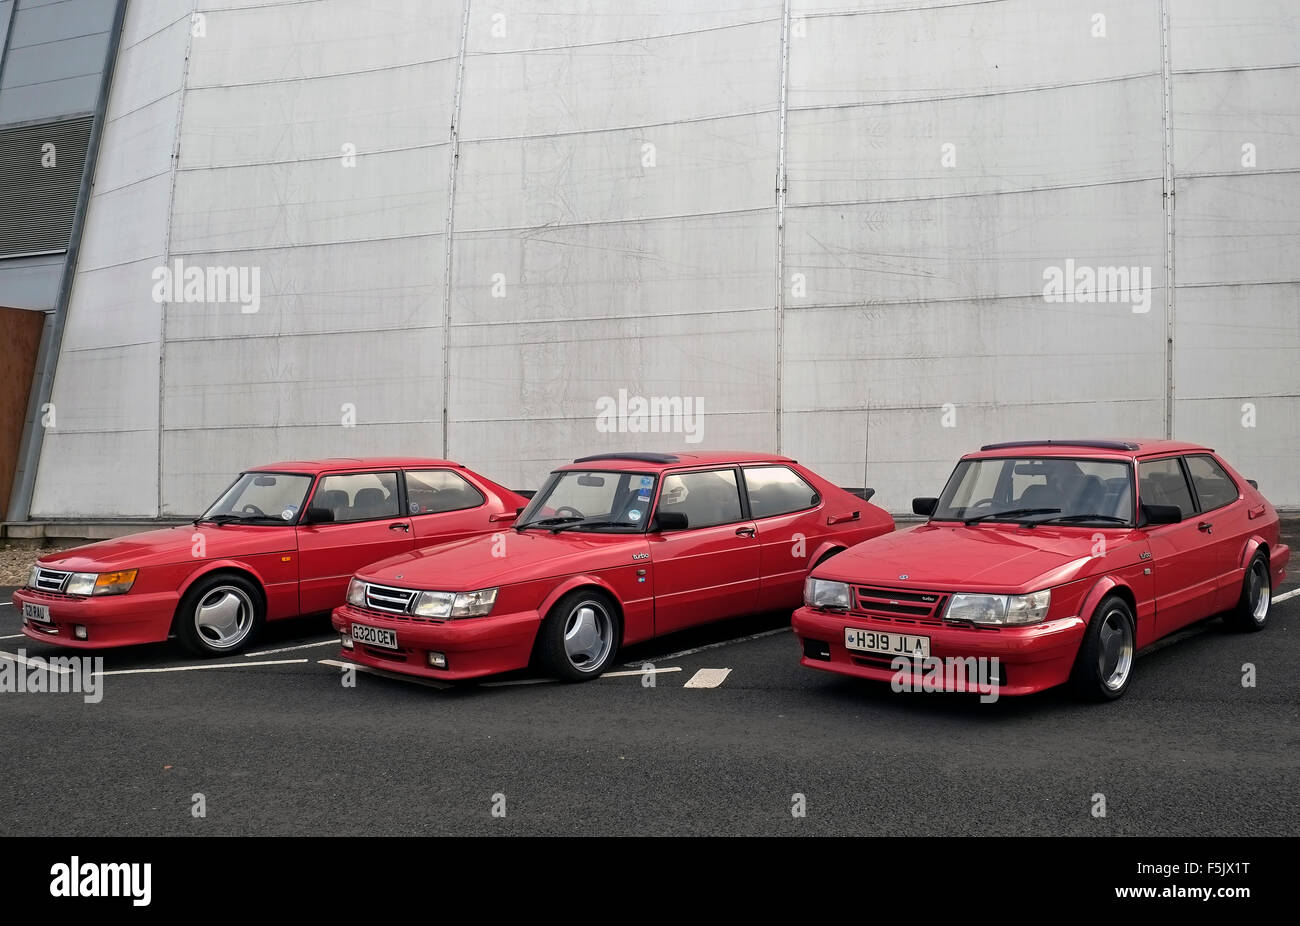 Saab 900 Turbo 3 Red Cars In  Line Stock Photo